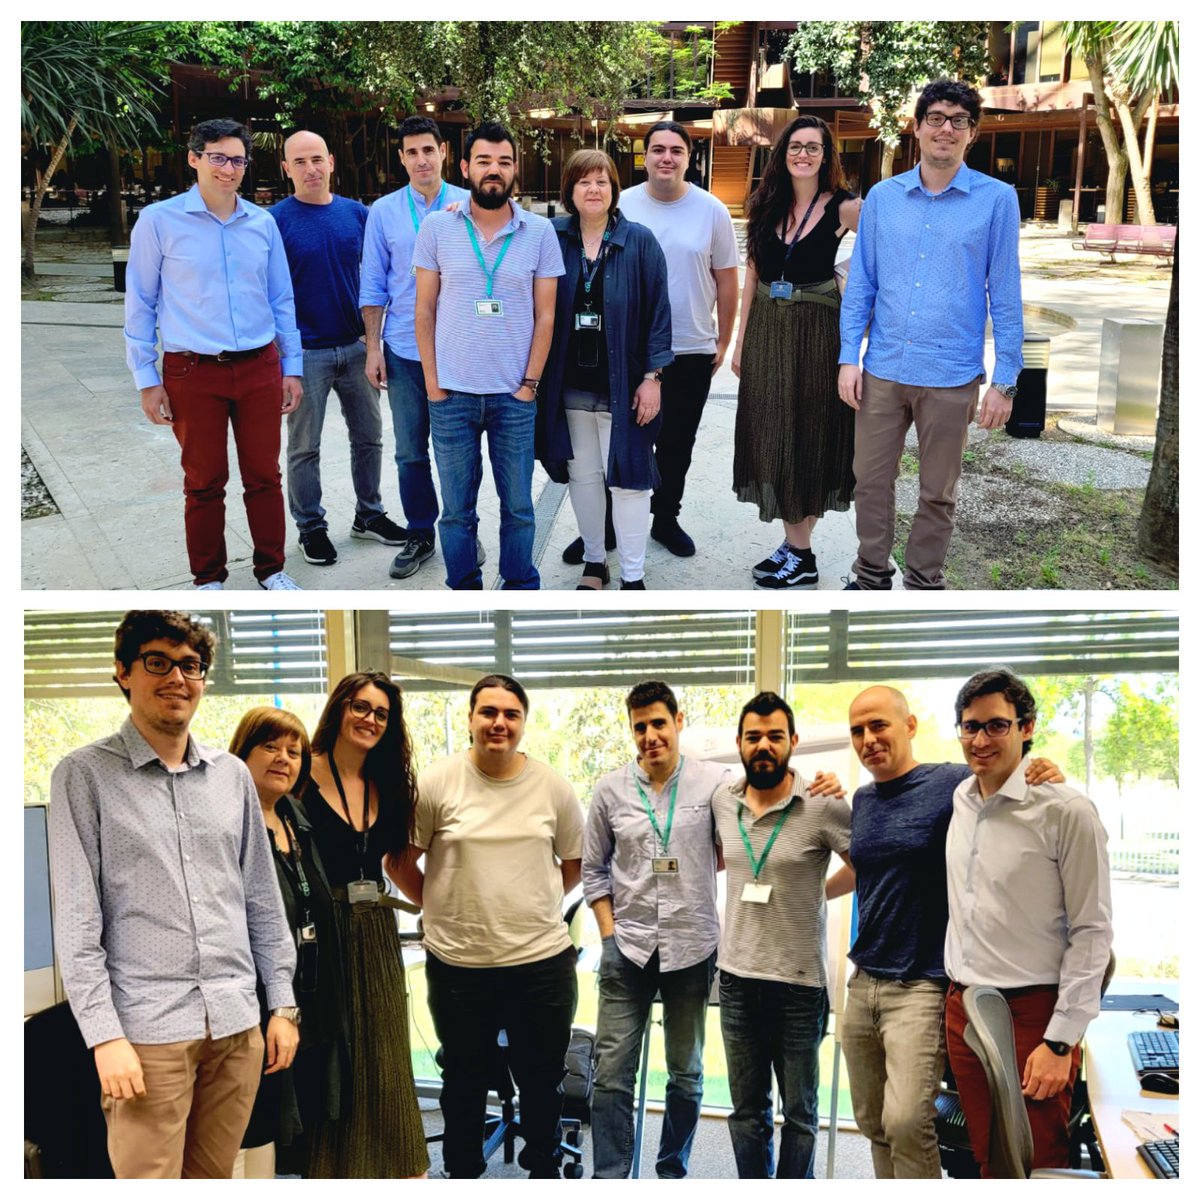 This week we have been able to meet our co-workers from Sevilla and Leon.

Thanks to @HPECDS_ES and @loli_lamas for eliminating distance and giving us this opportunity

#becds #NoSQLTeam